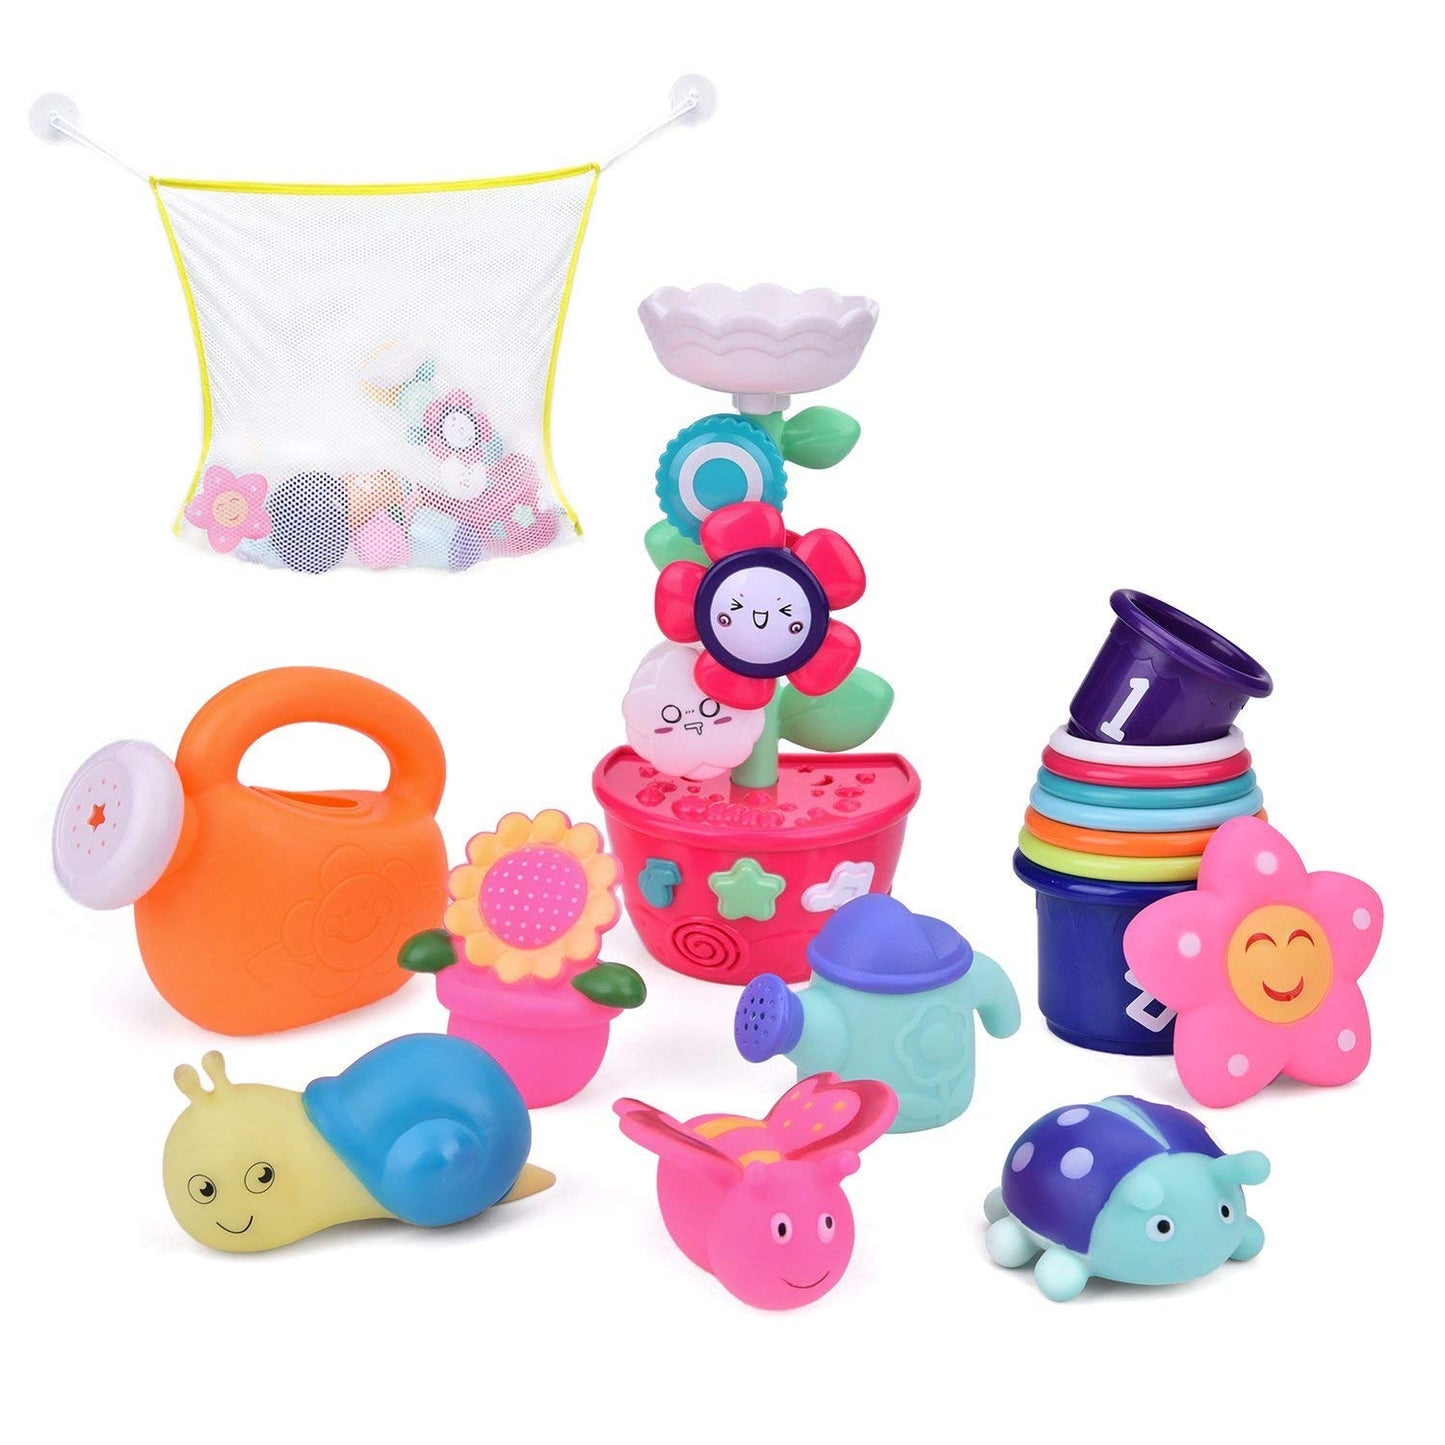 9 PCs Bath Toys Toddlers, Flower Waterfall Water Station Garden Squirter Toys, Stacking Cups Watering Can, Bath Toy Organizer Included Xmas Gift for Kids